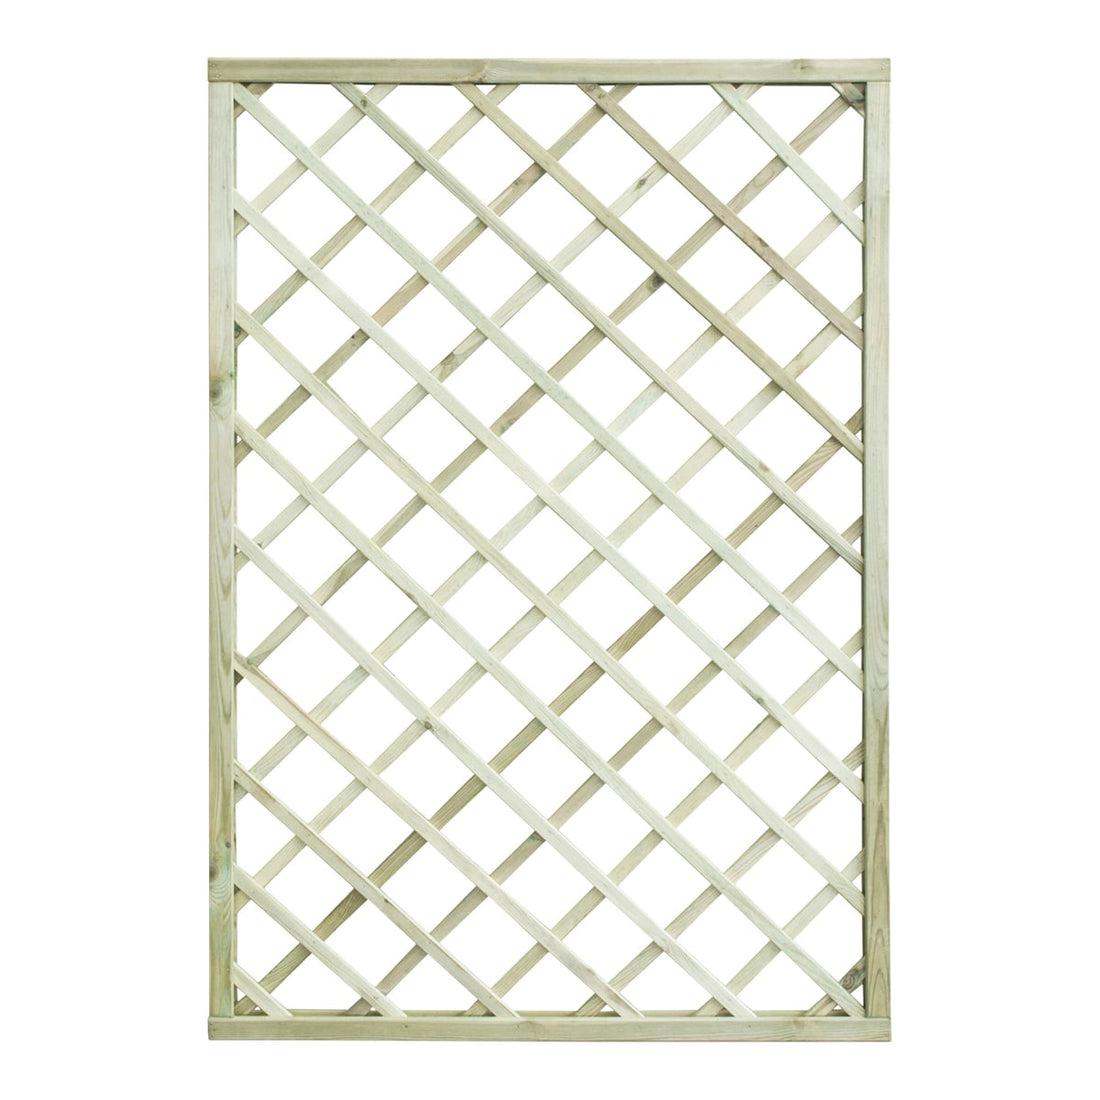 DIAGO GRATING 120 X 180 CM IN AUTOCLAVE-TREATED PINE WOOD